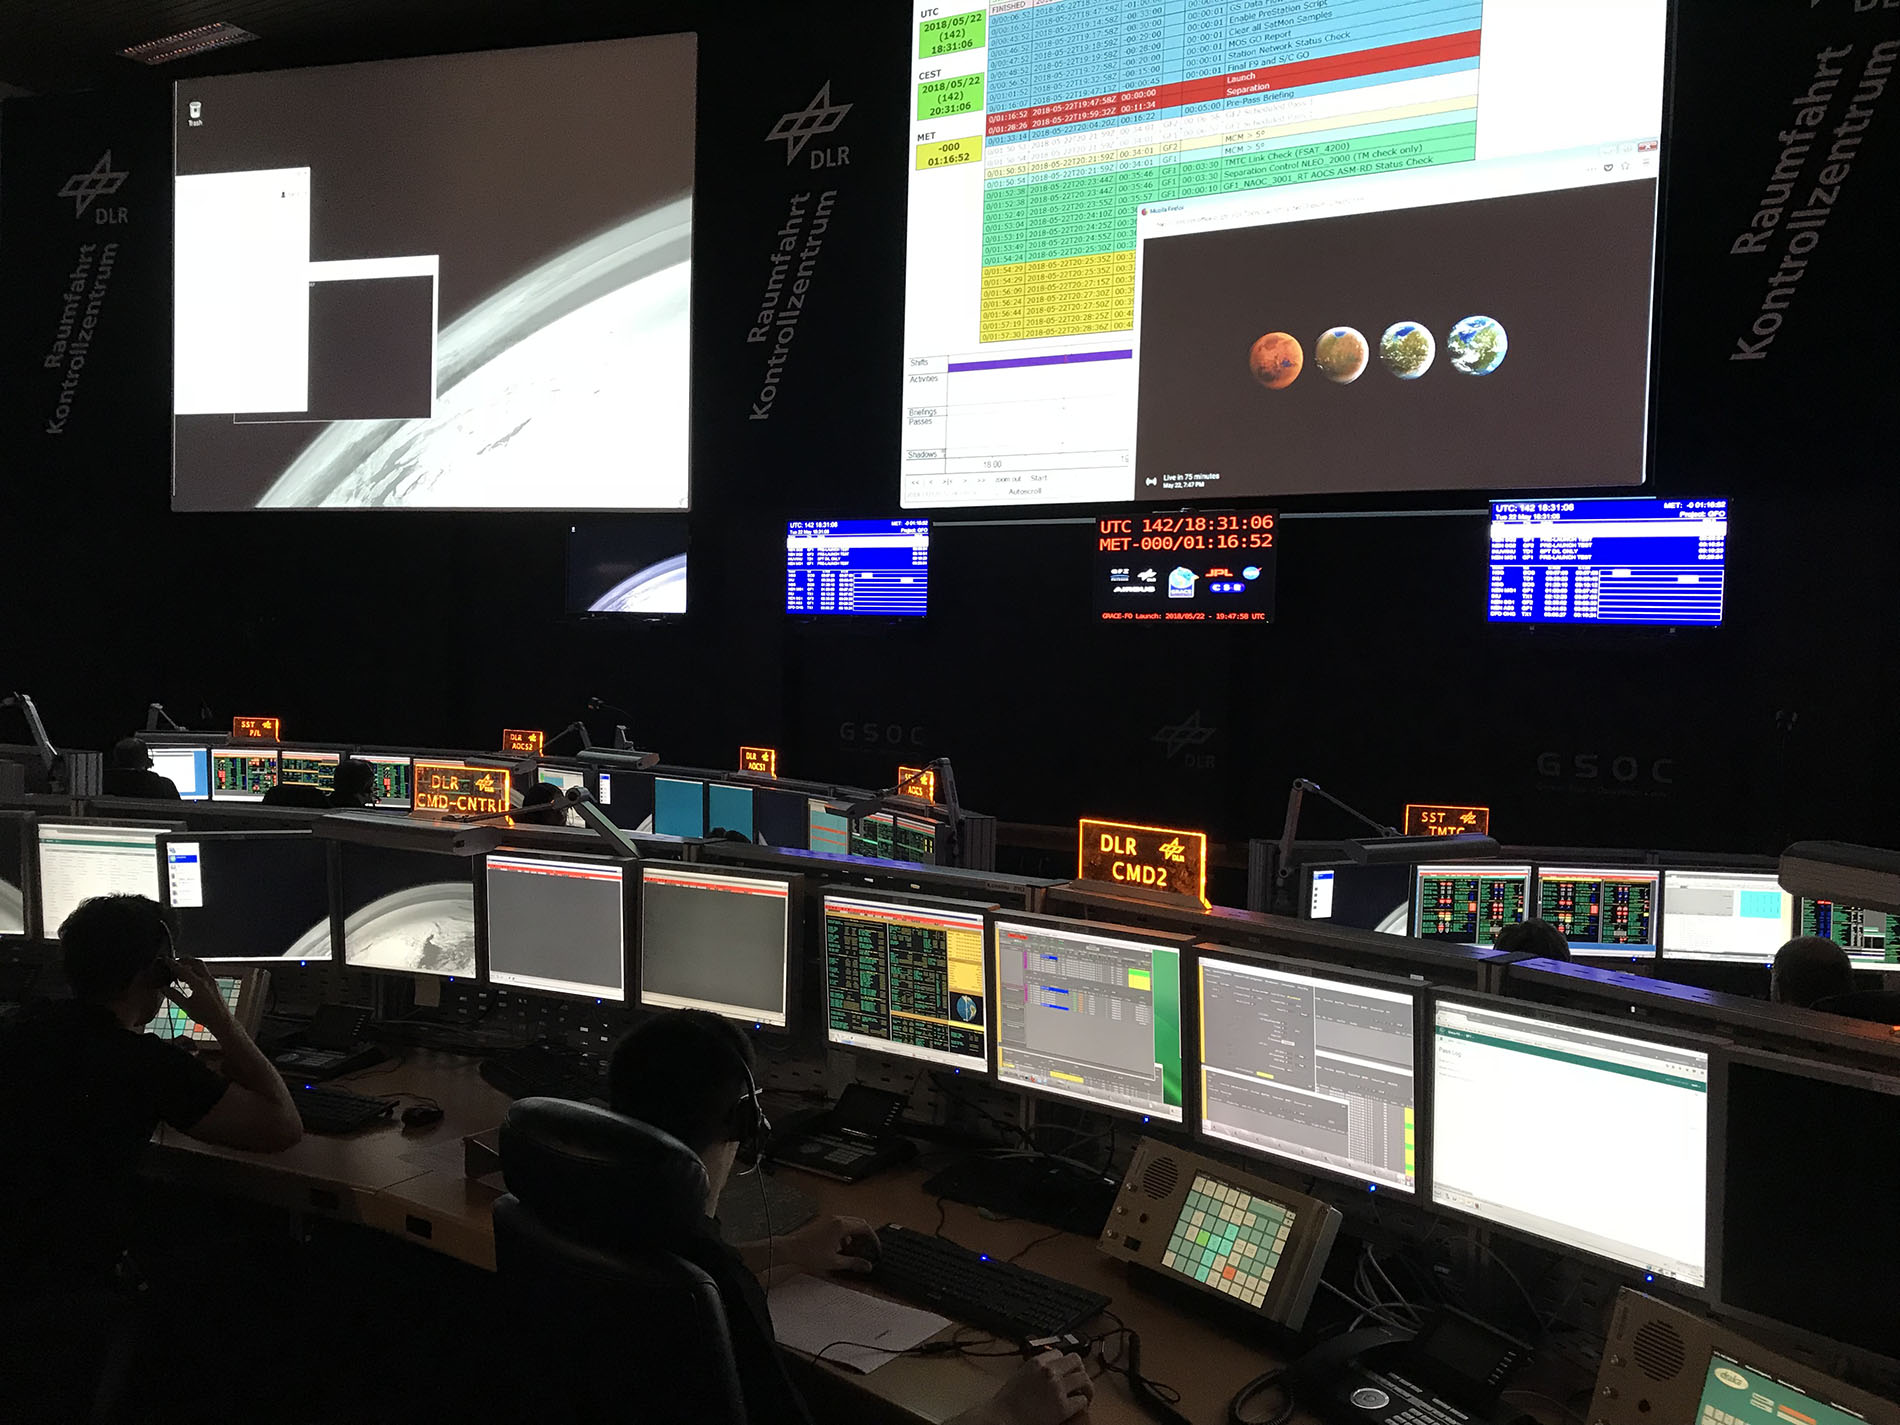 The darkened room of mission control is lighted by computer screens.